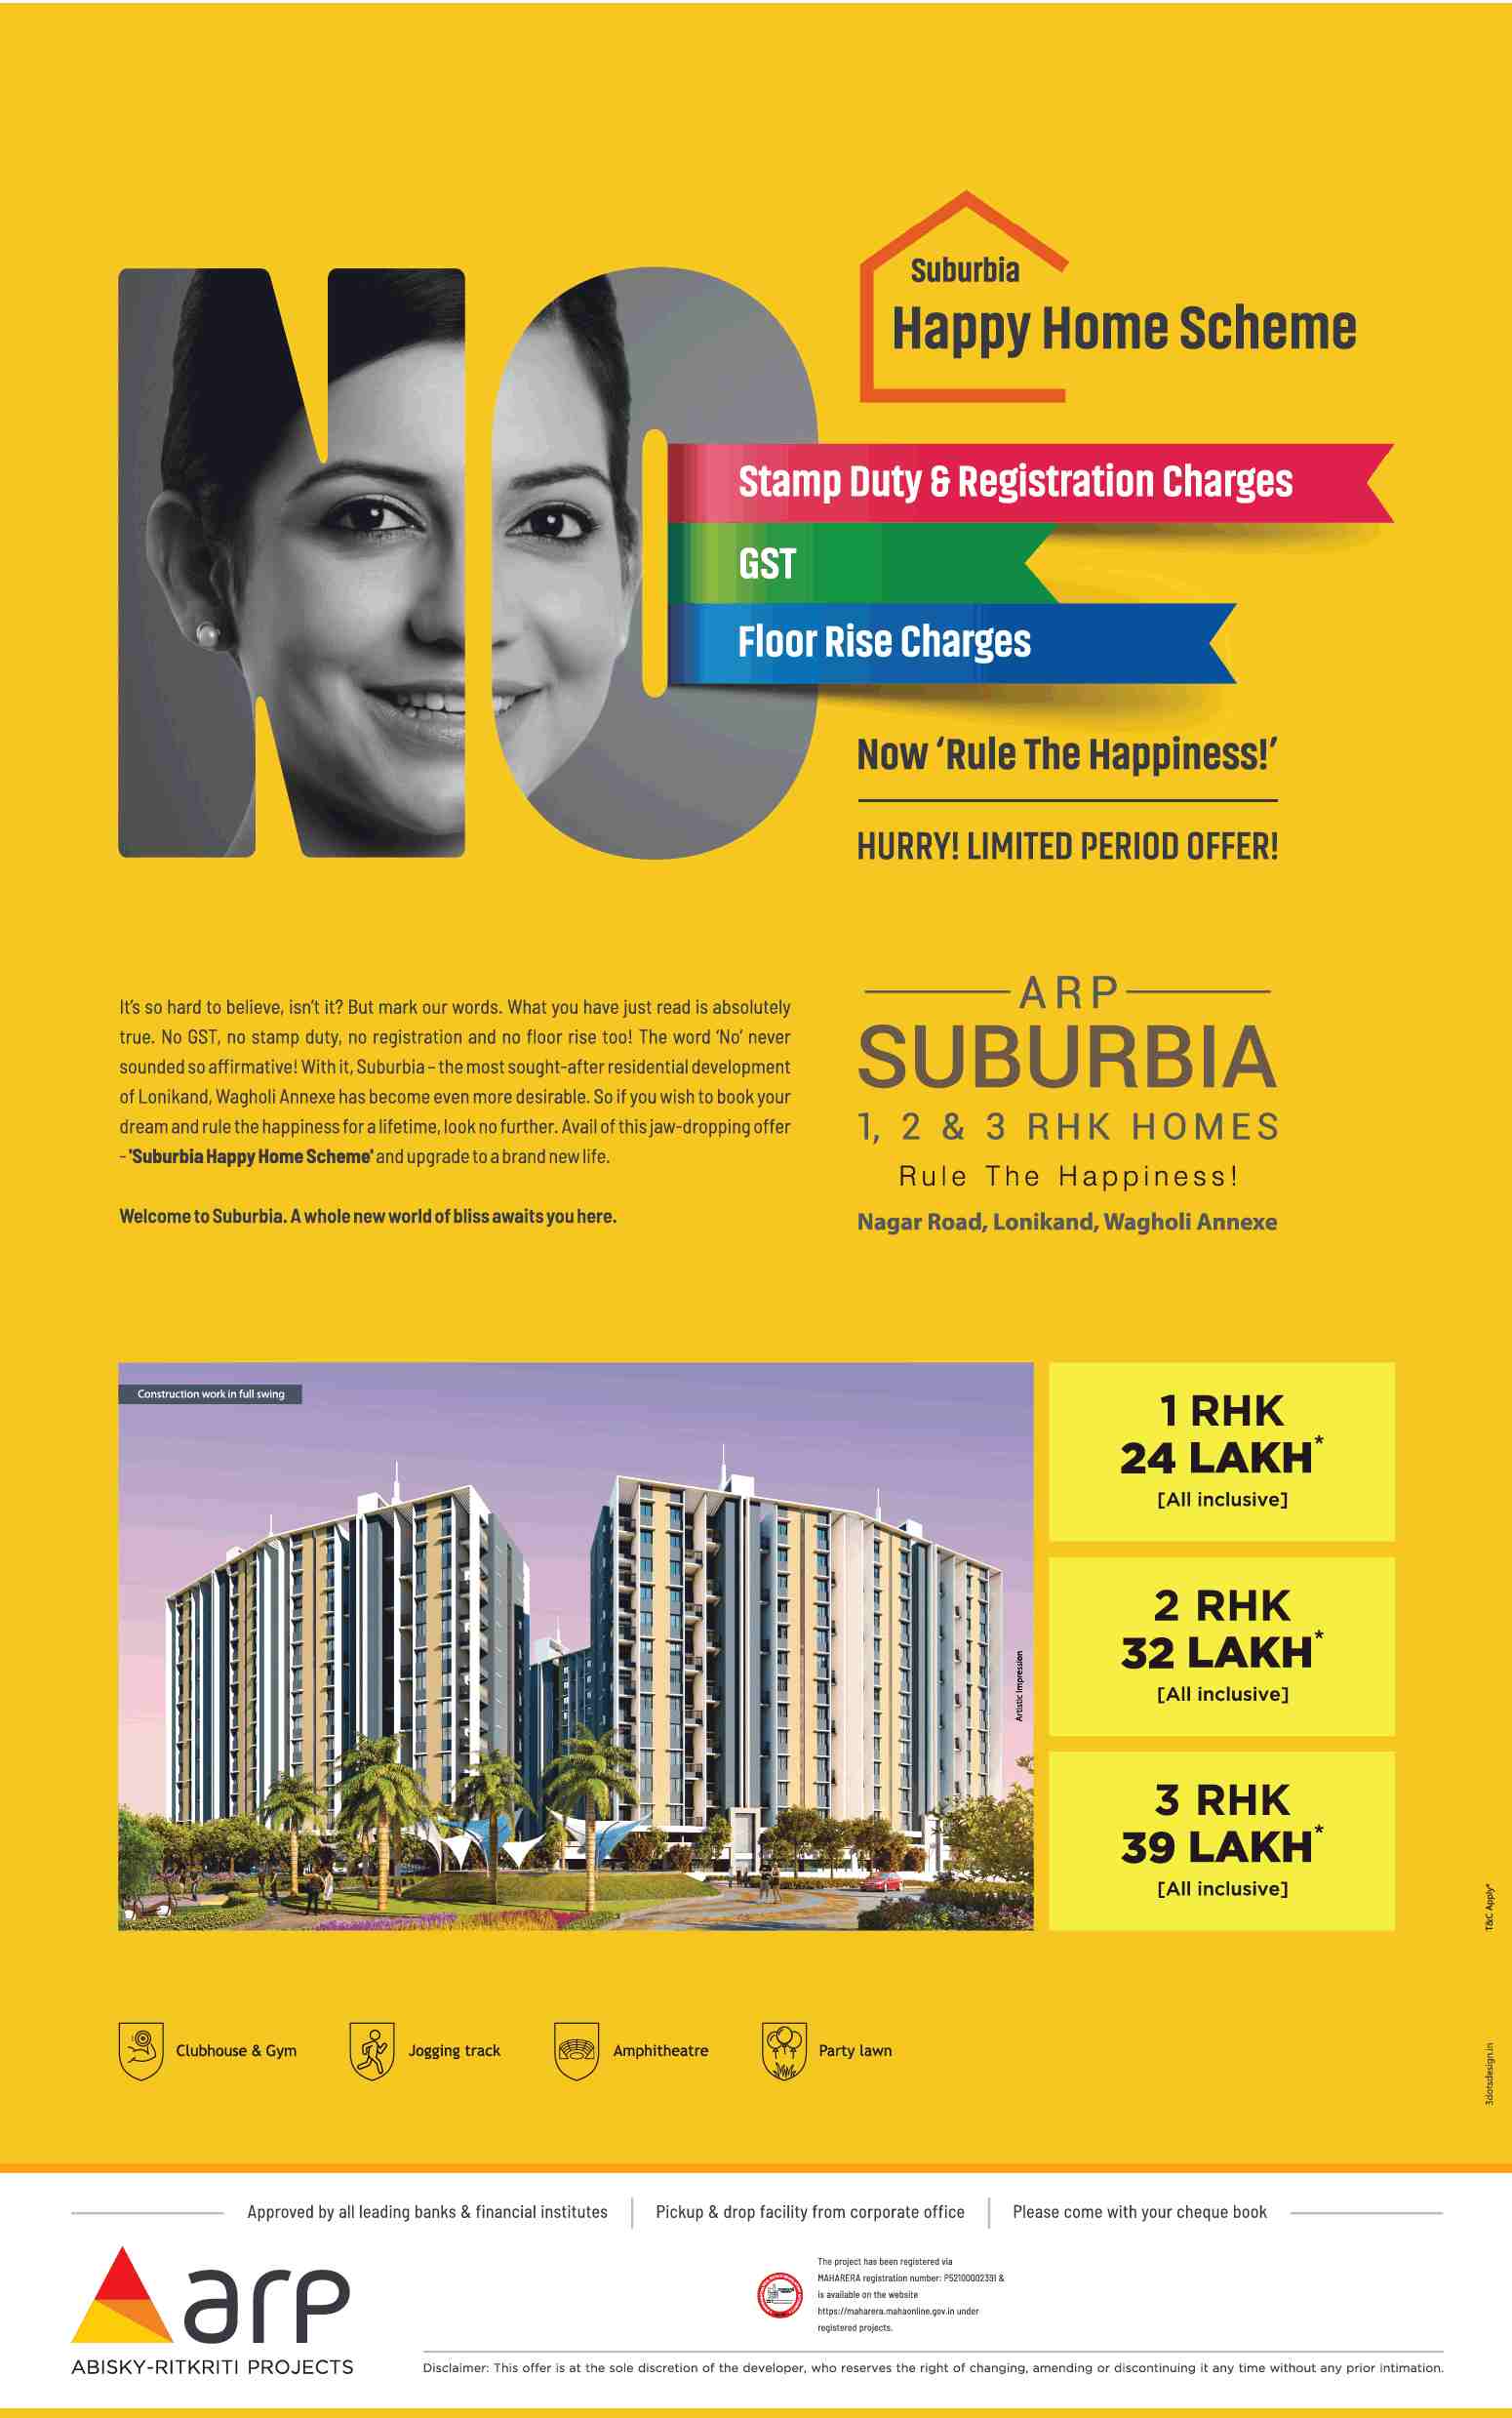 Avail the Happy Home Scheme at ARP Suburbia Estate in Pune Update